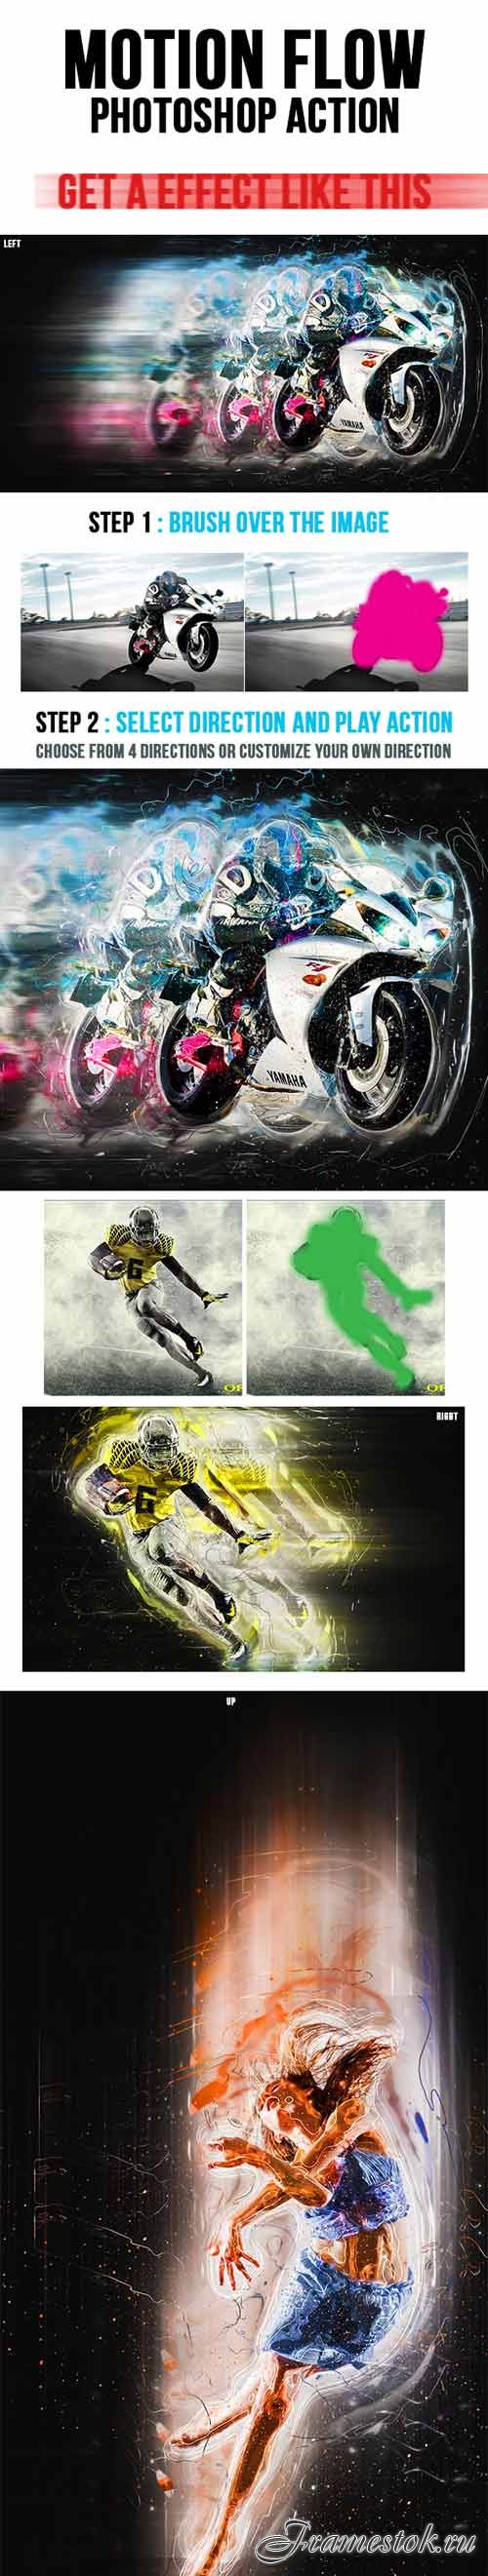 Motionflow Photoshop Action - Graphicriver 9300501